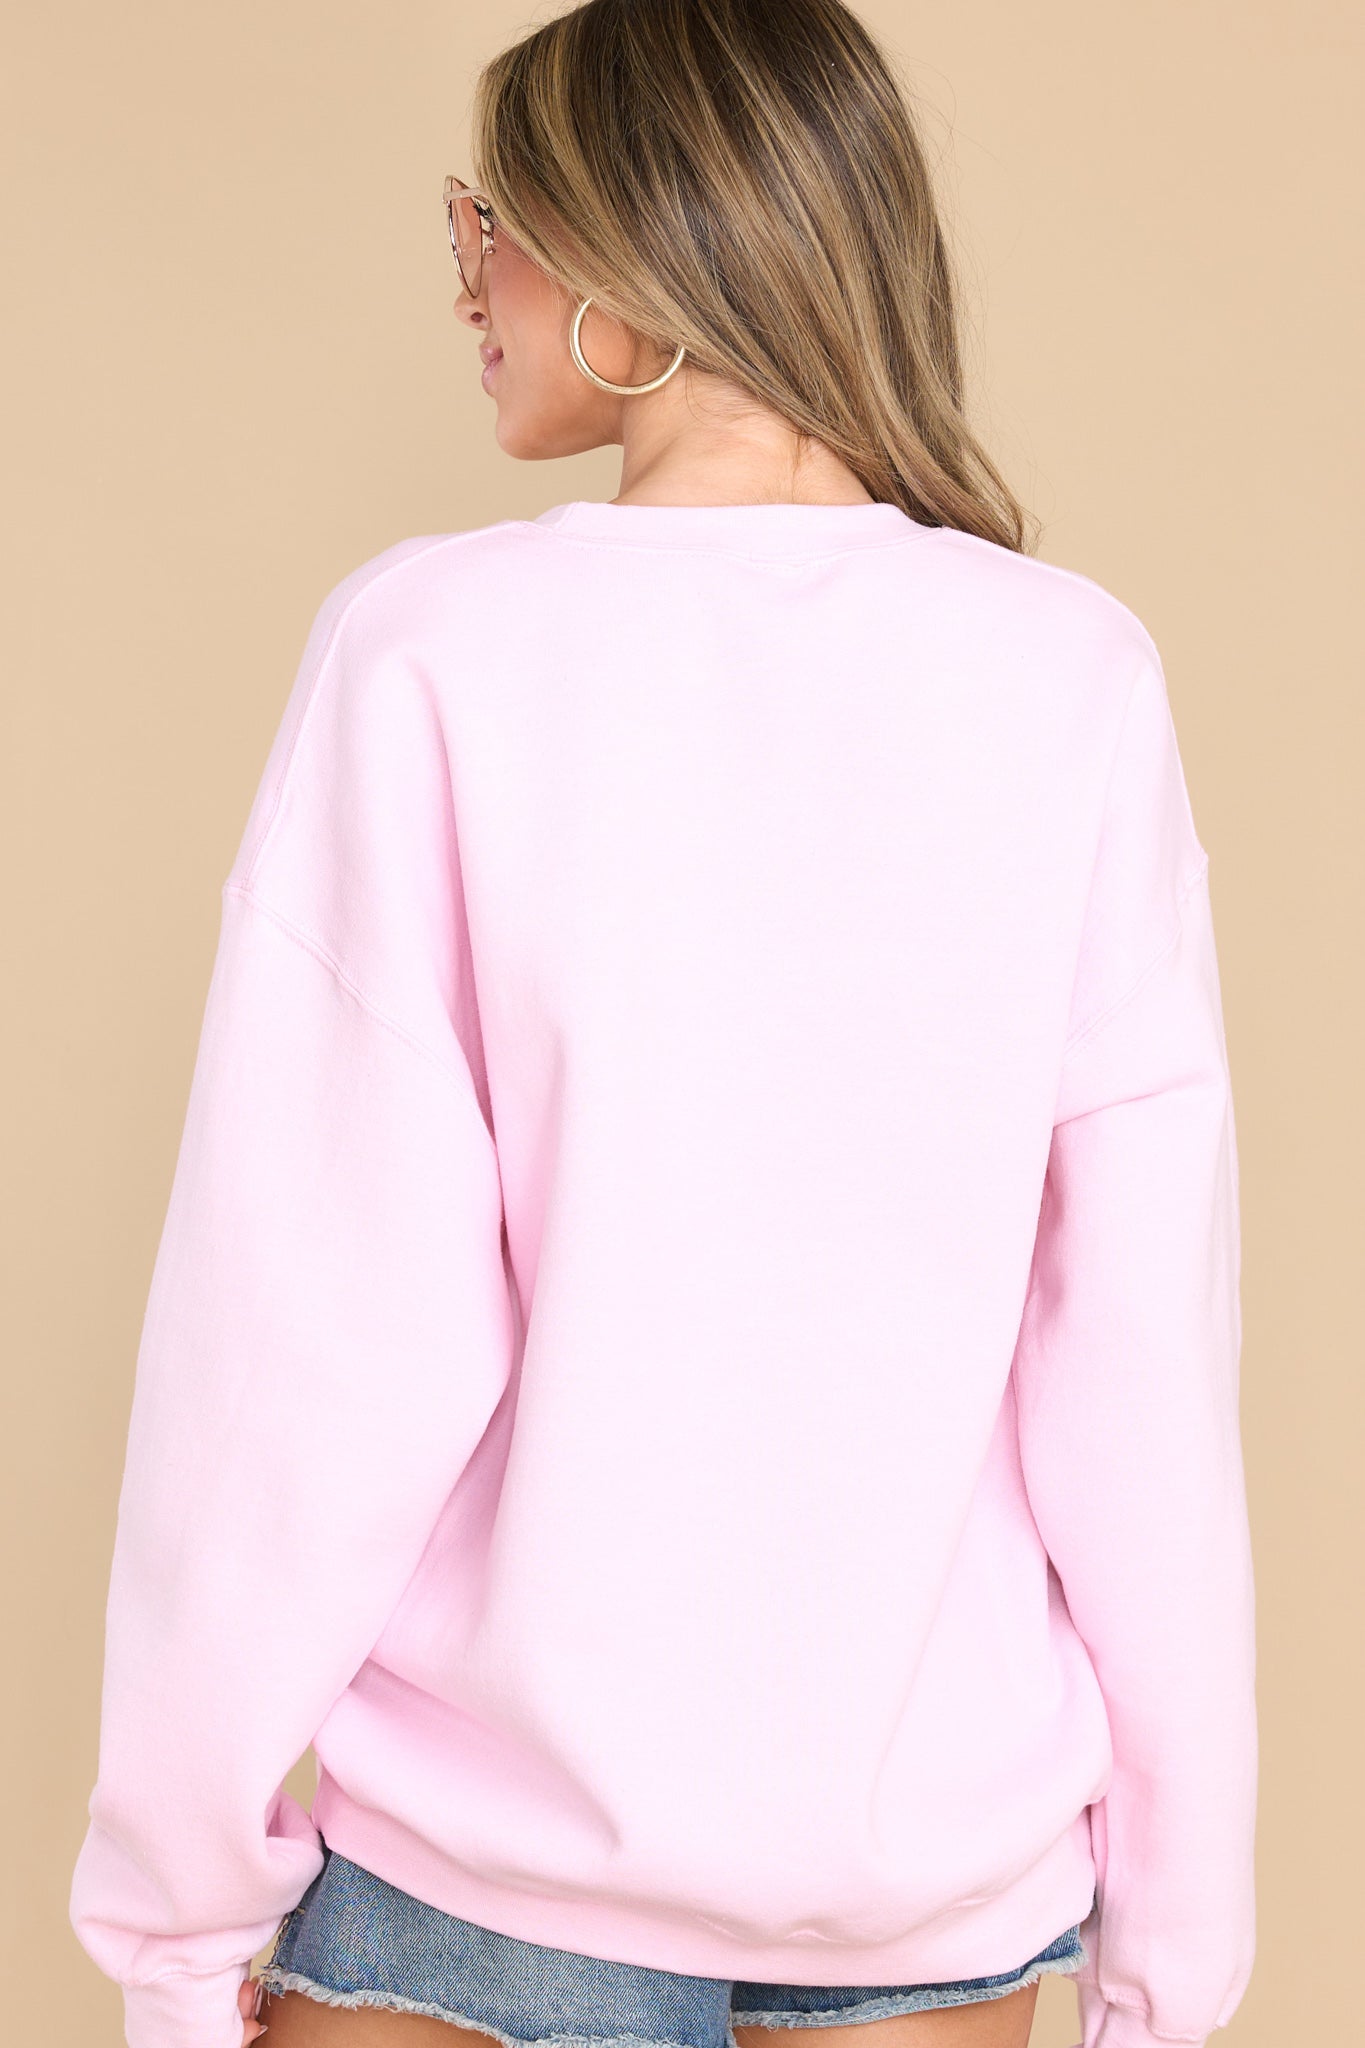 Totally Underrated Light Pink Sweatshirt - Red Dress